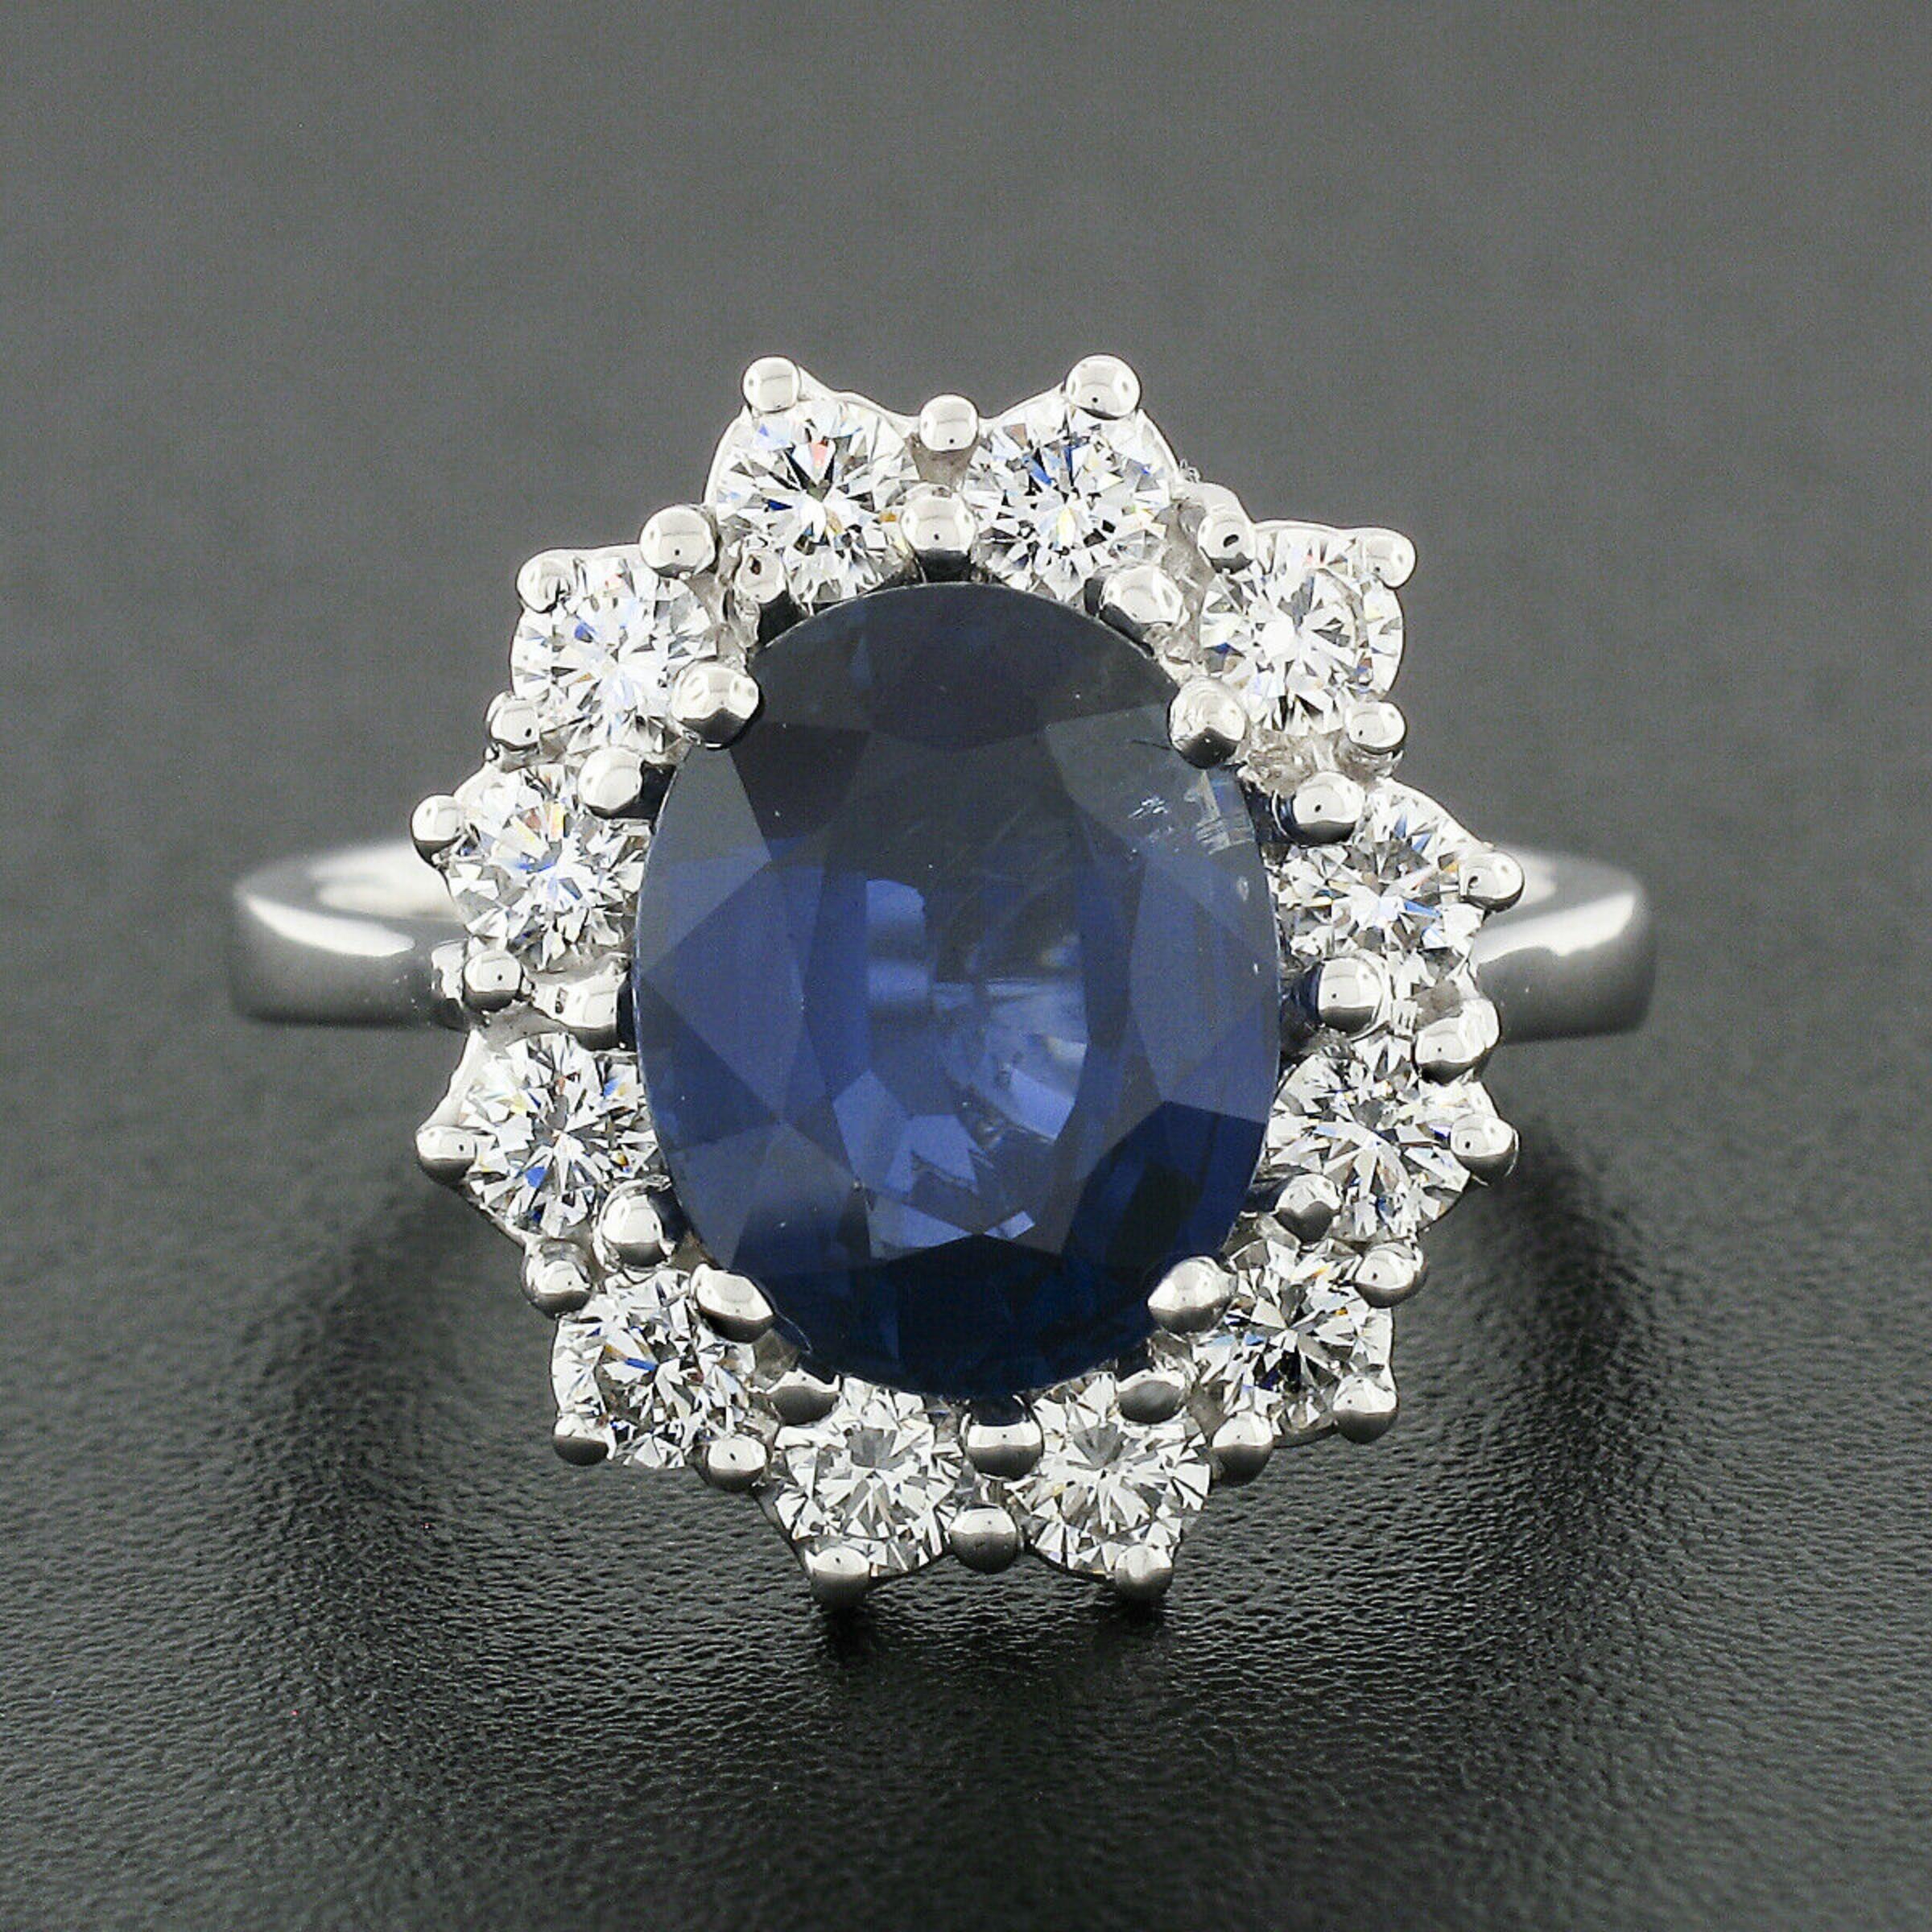 You are looking at a truly TOP QUALITY sapphire and diamond 